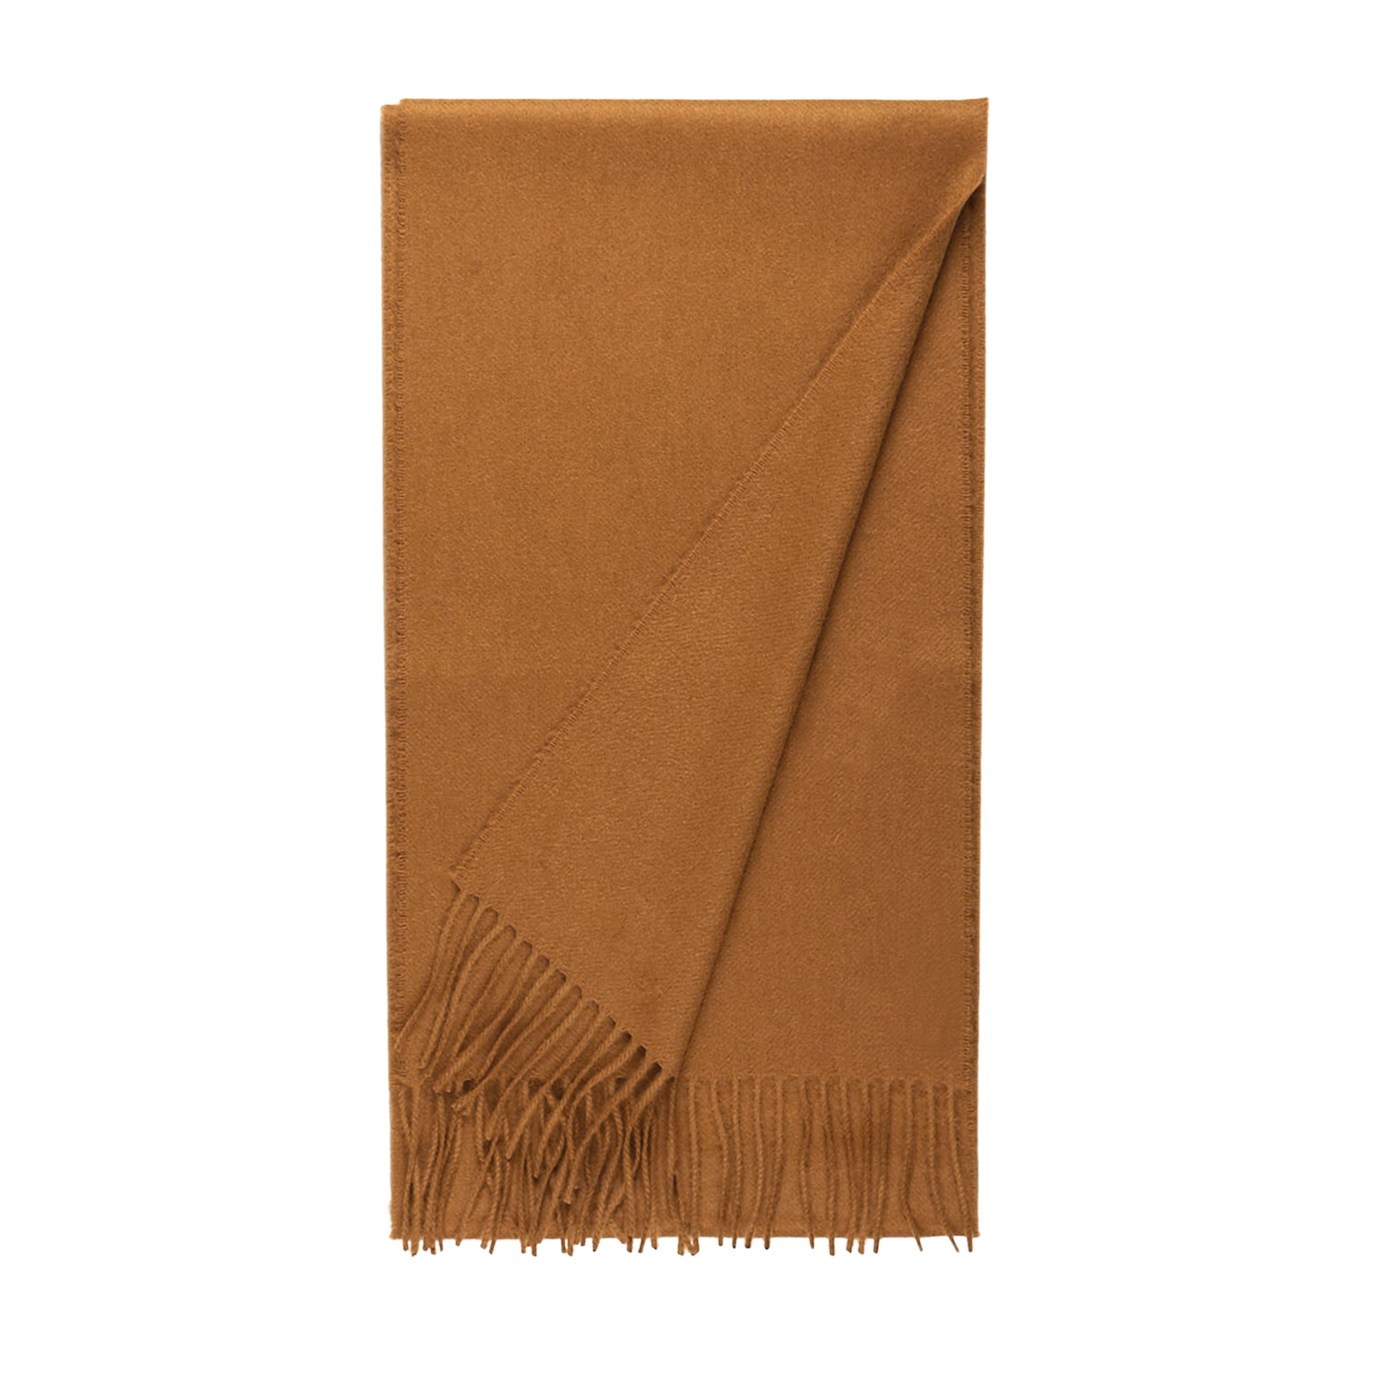 Johnstons of Elgin Camel Beige Cashmere Scarf Feature2